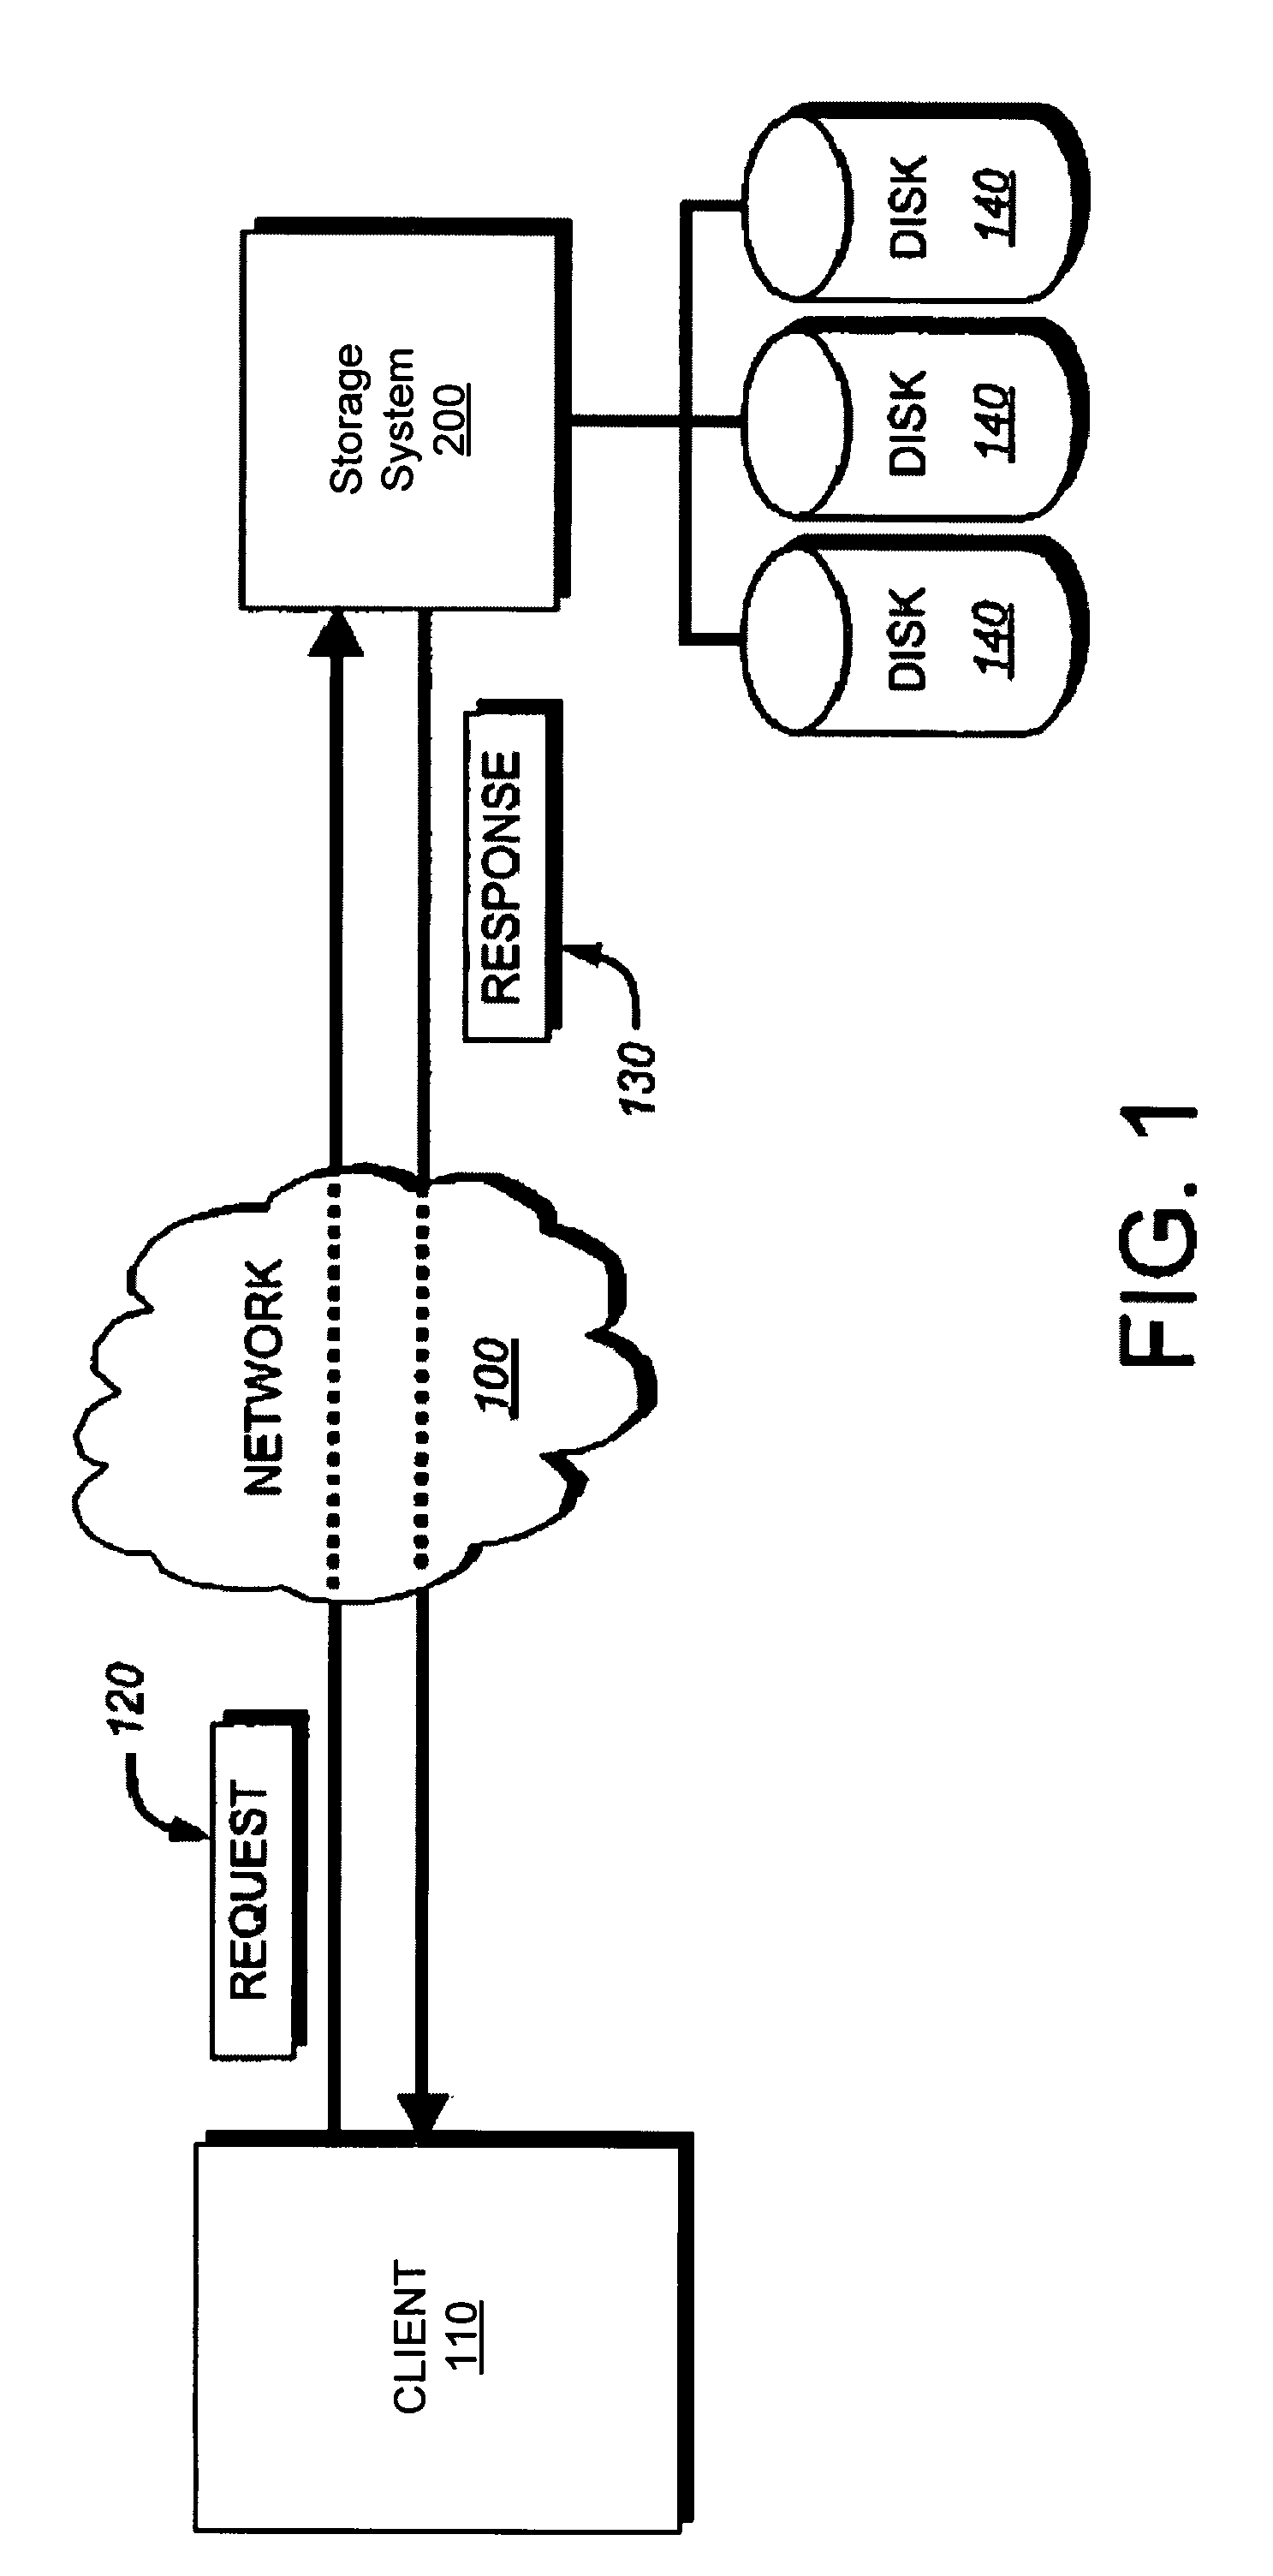 Evaluating and repairing errors during servicing of storage devices